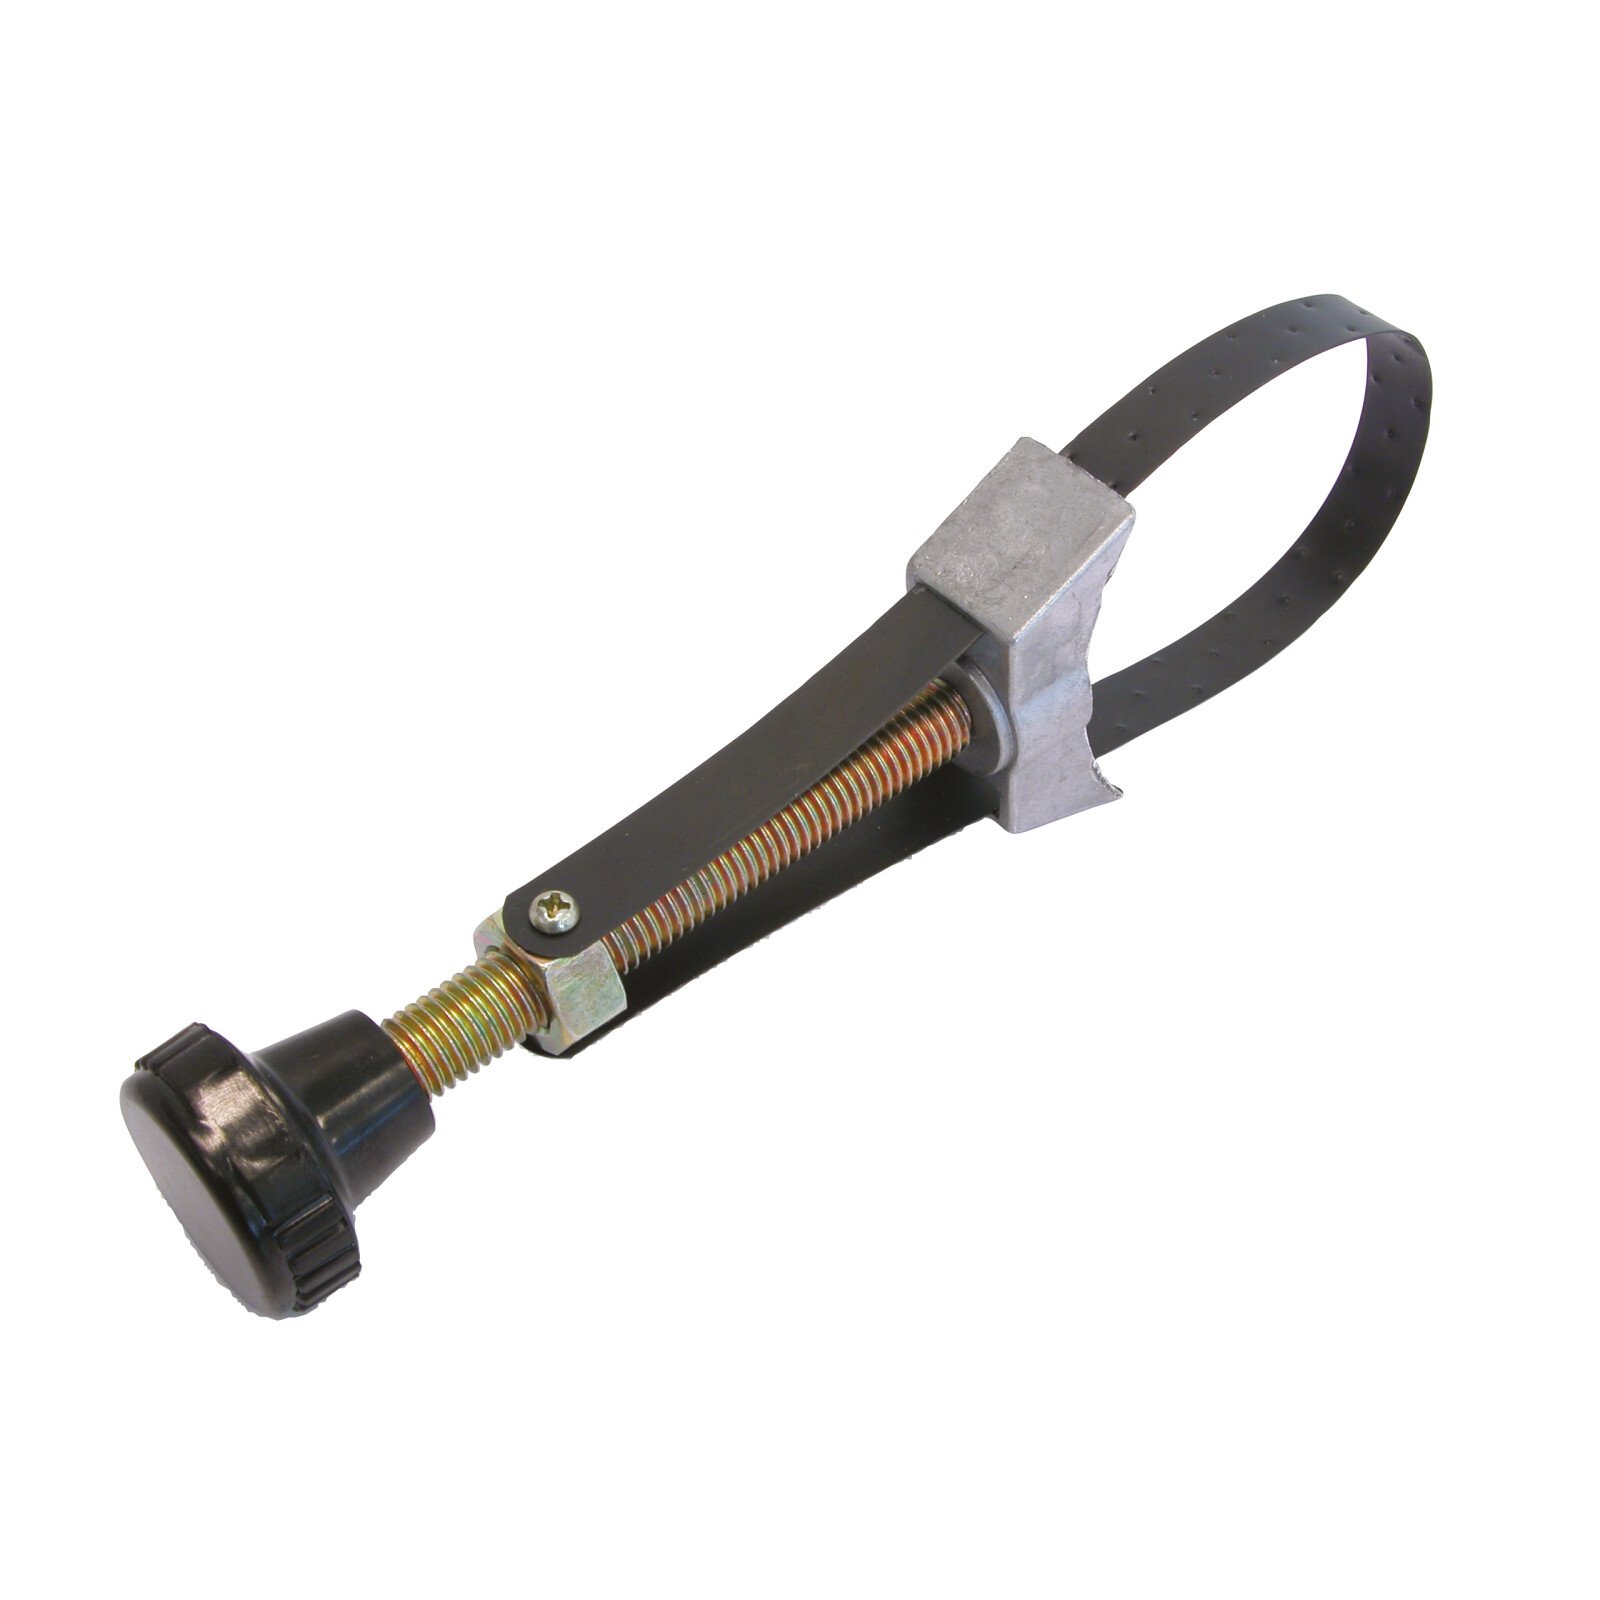 Carpoint Metal belt oil filter wrench thumb